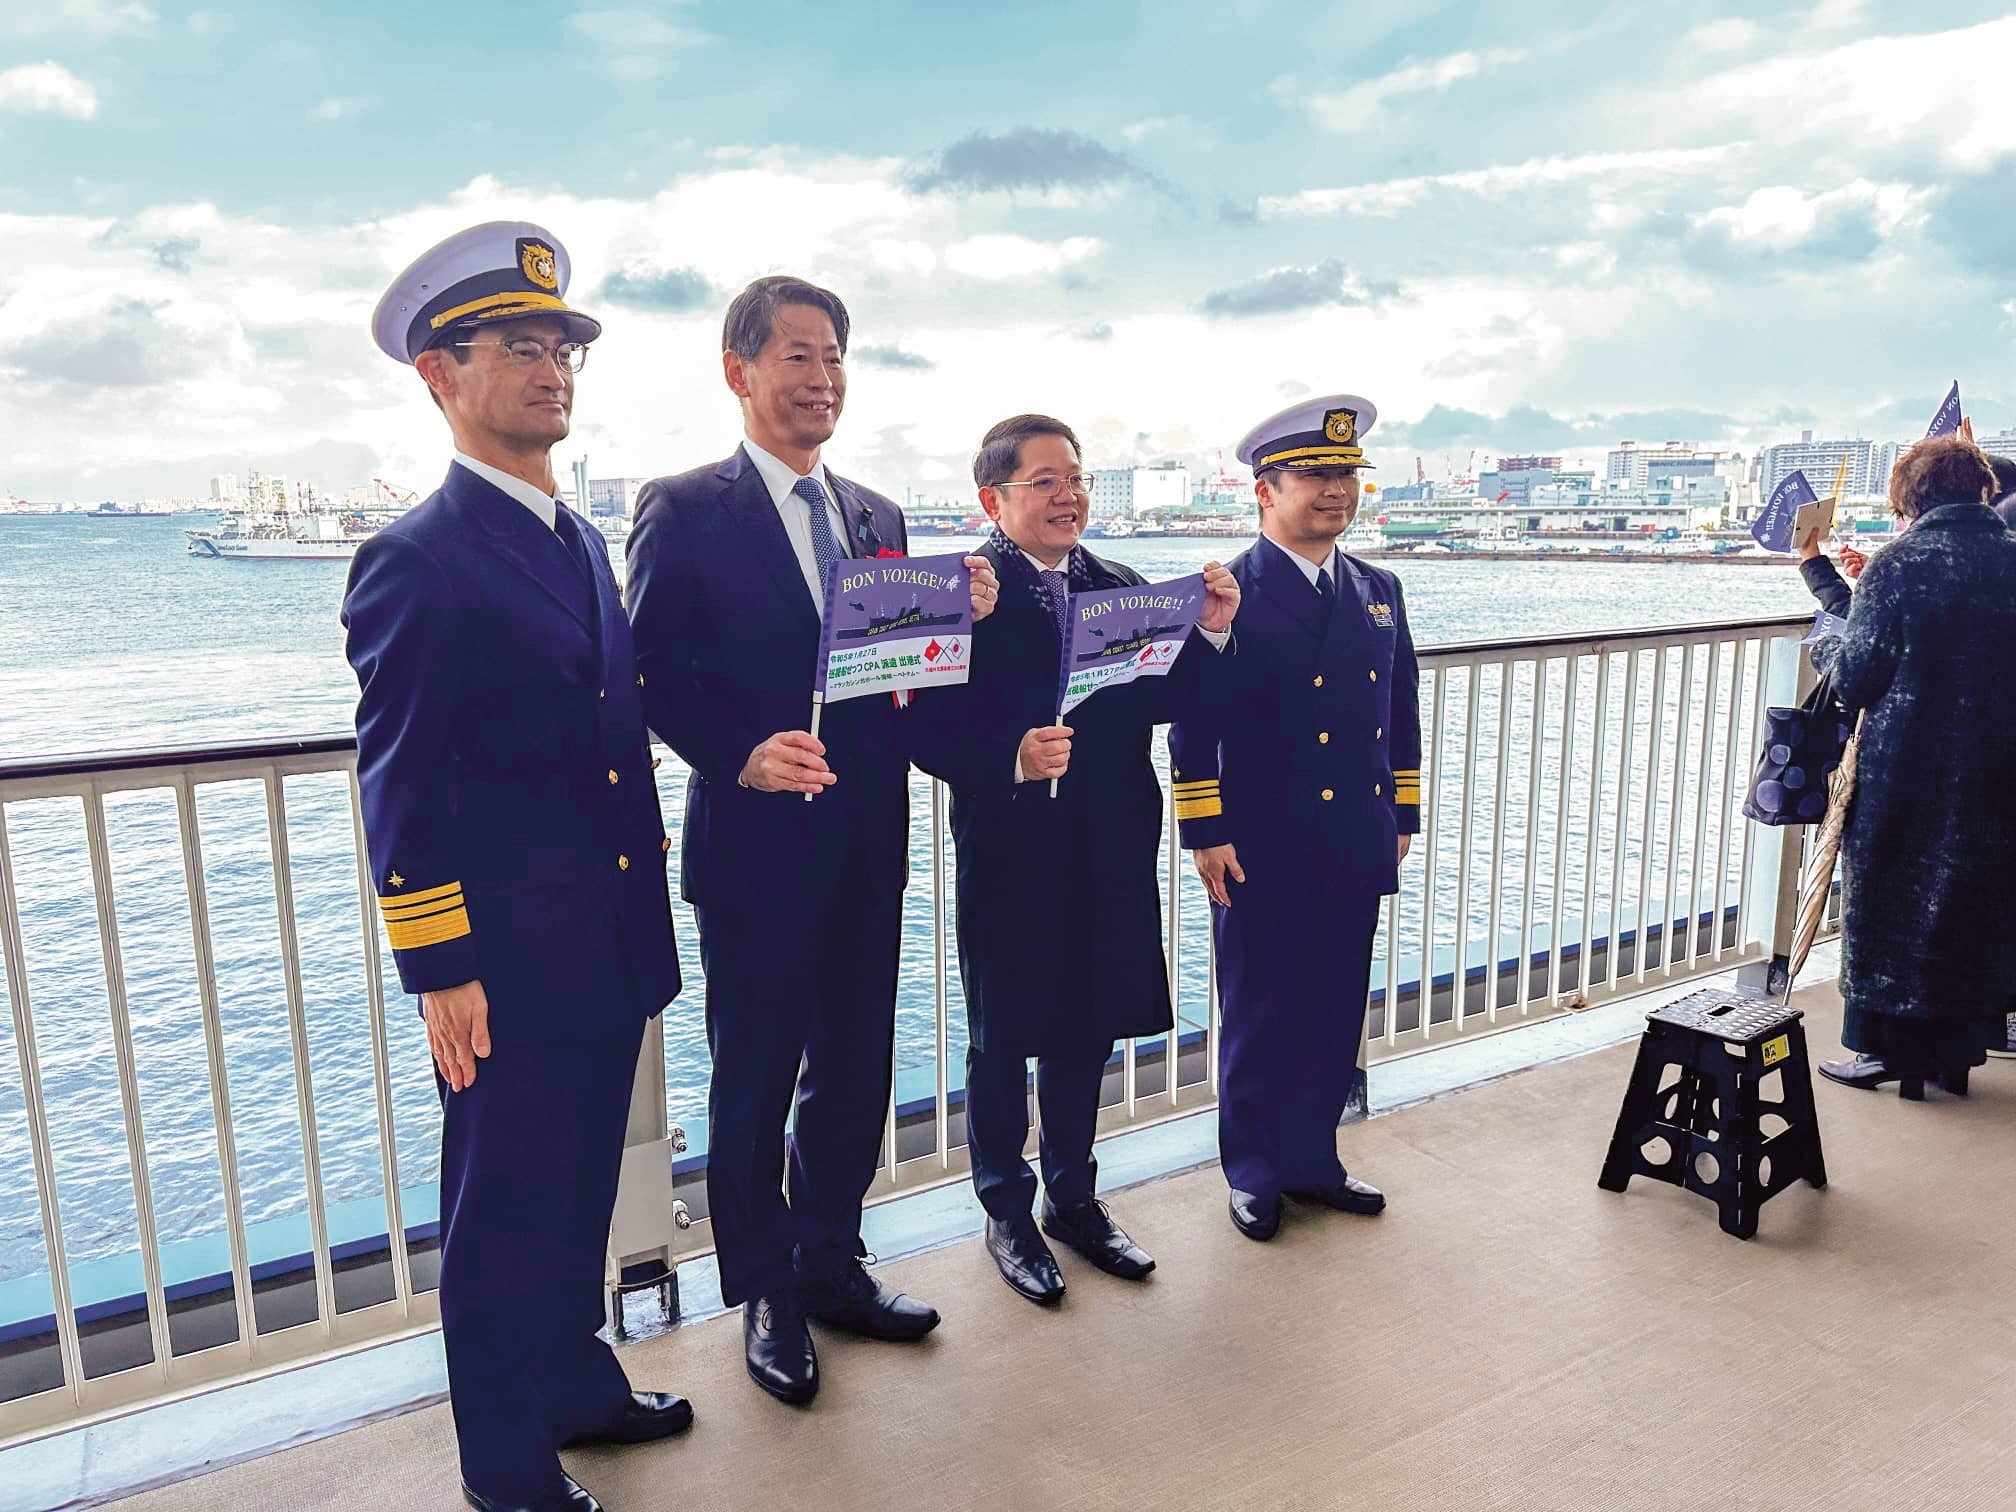 Local cooperation: A solid foundation for Vietnam-Japan Comprehensive Strategic Partnership